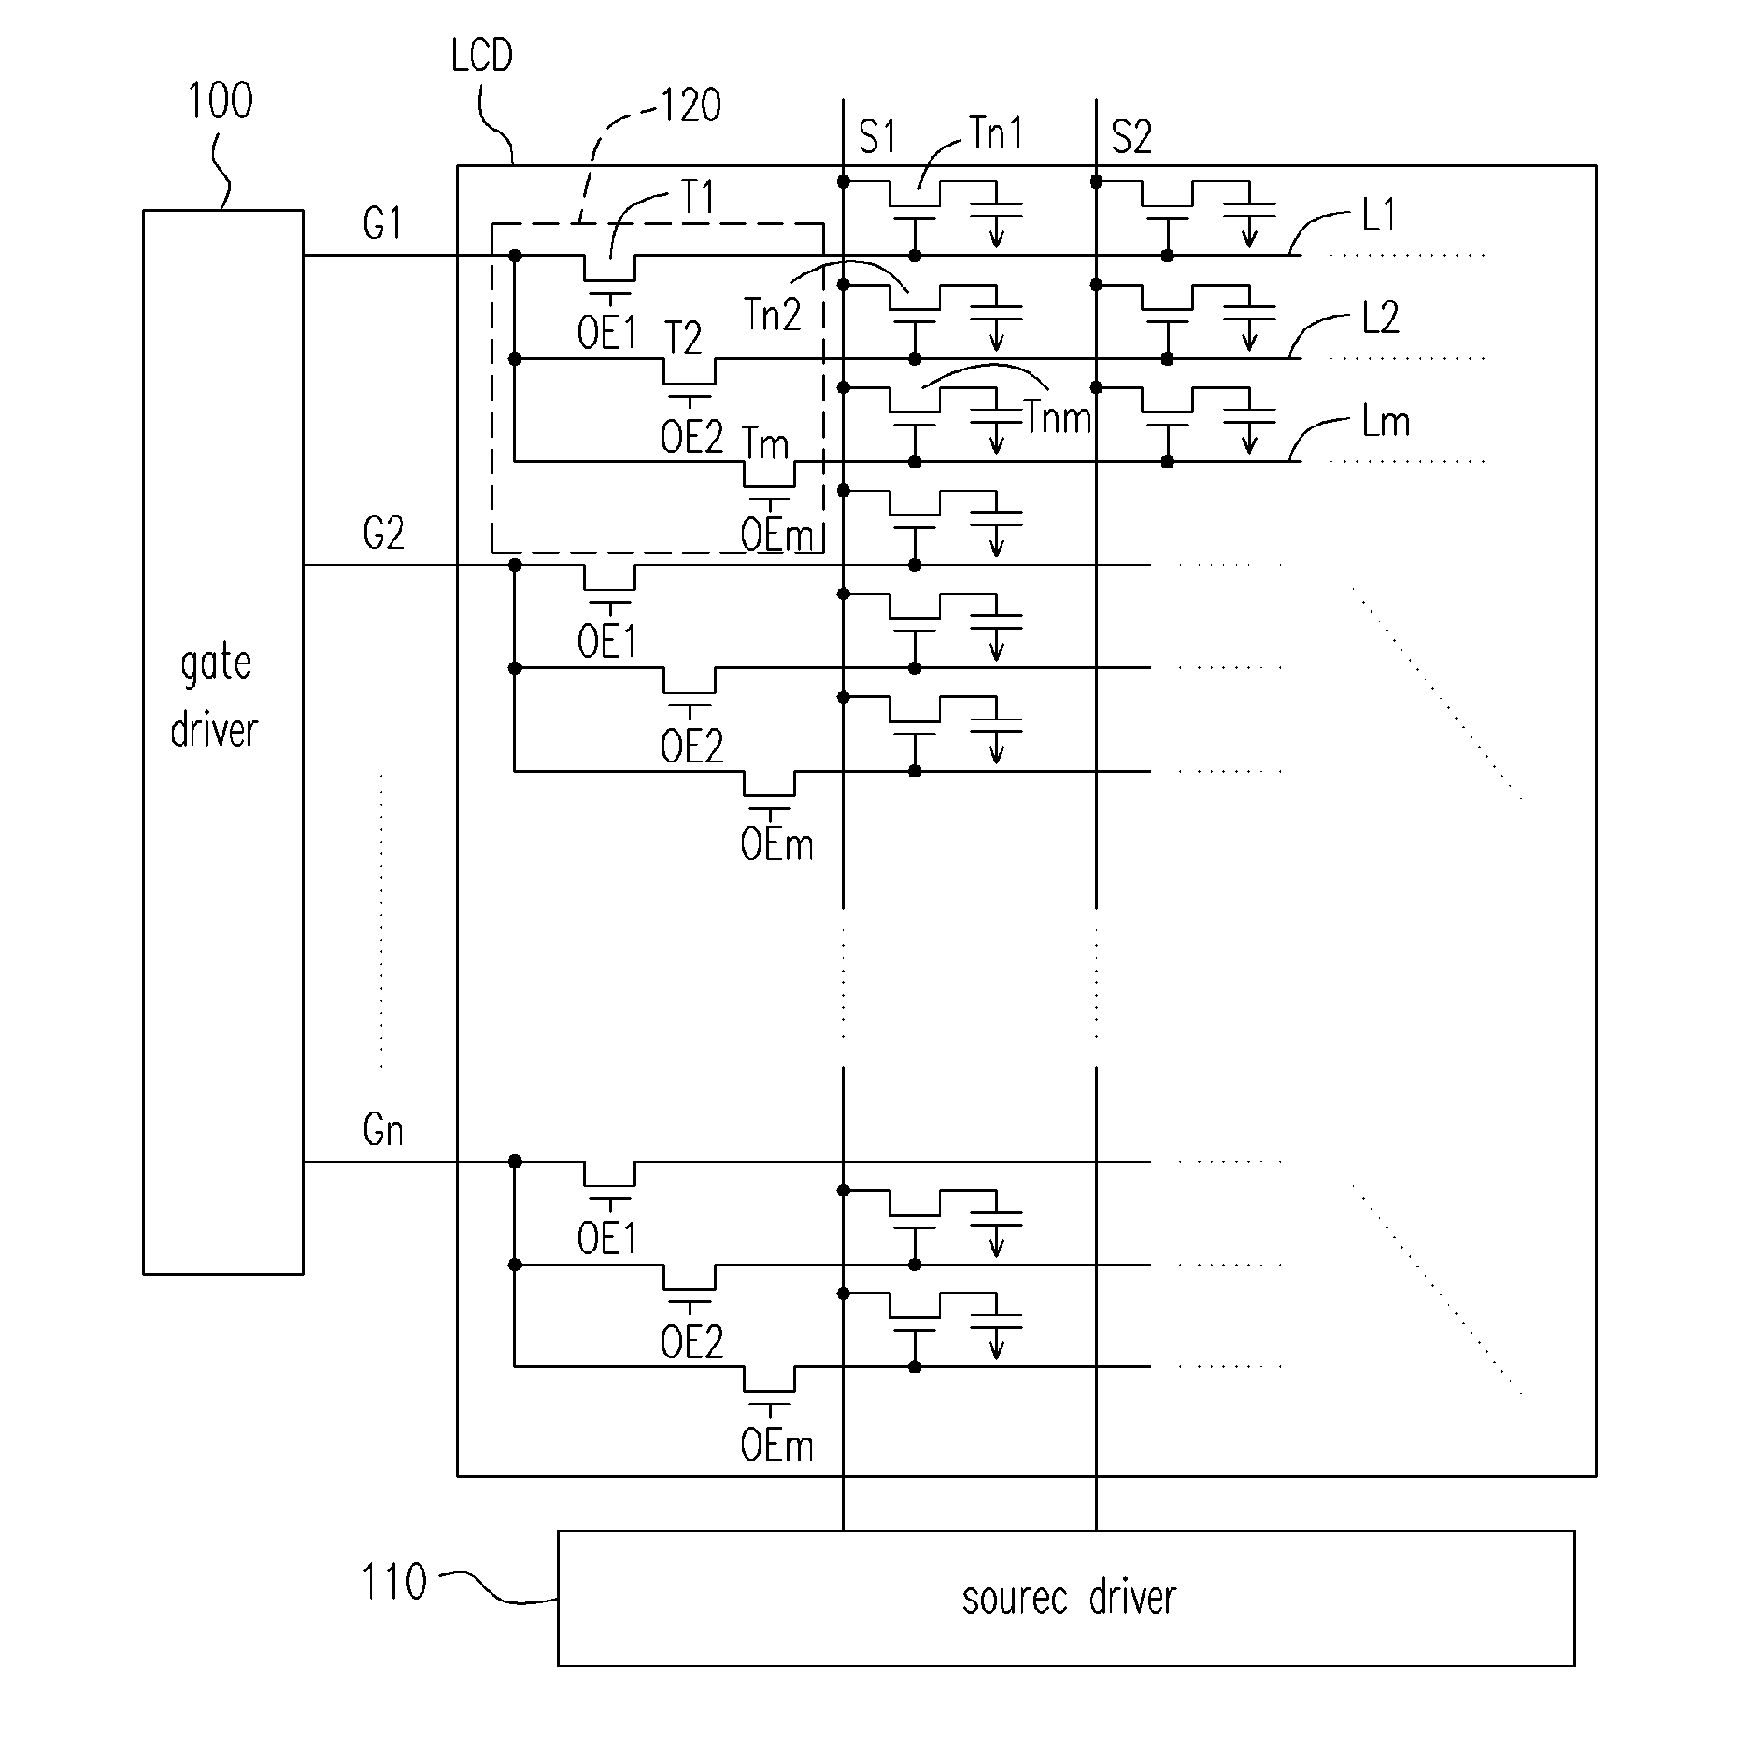 Gate switch apparatus for amorphous silicon LCD